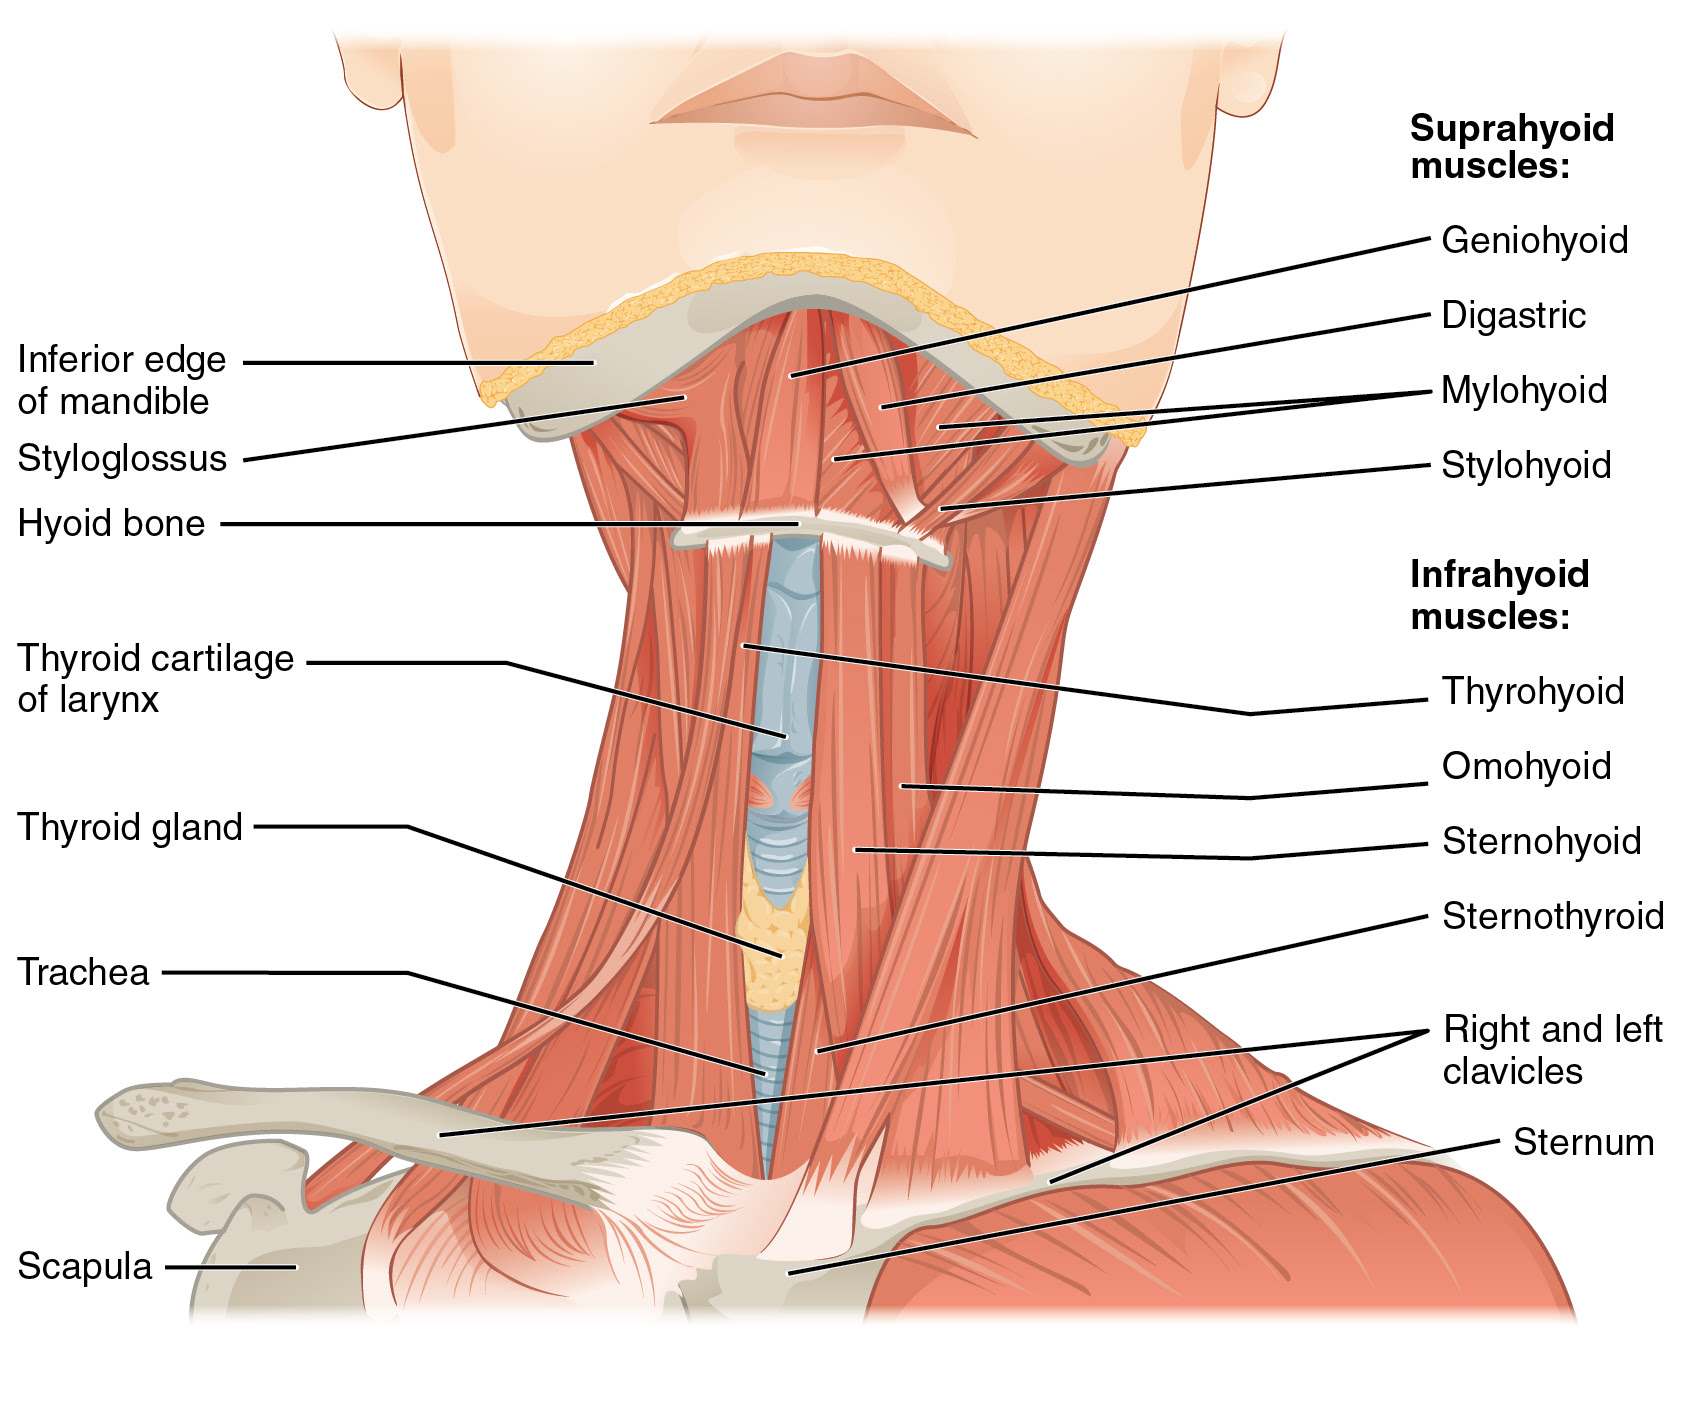 Want to learn more about it? Axial Muscles Of The Head Neck And Back Anatomy Physiology